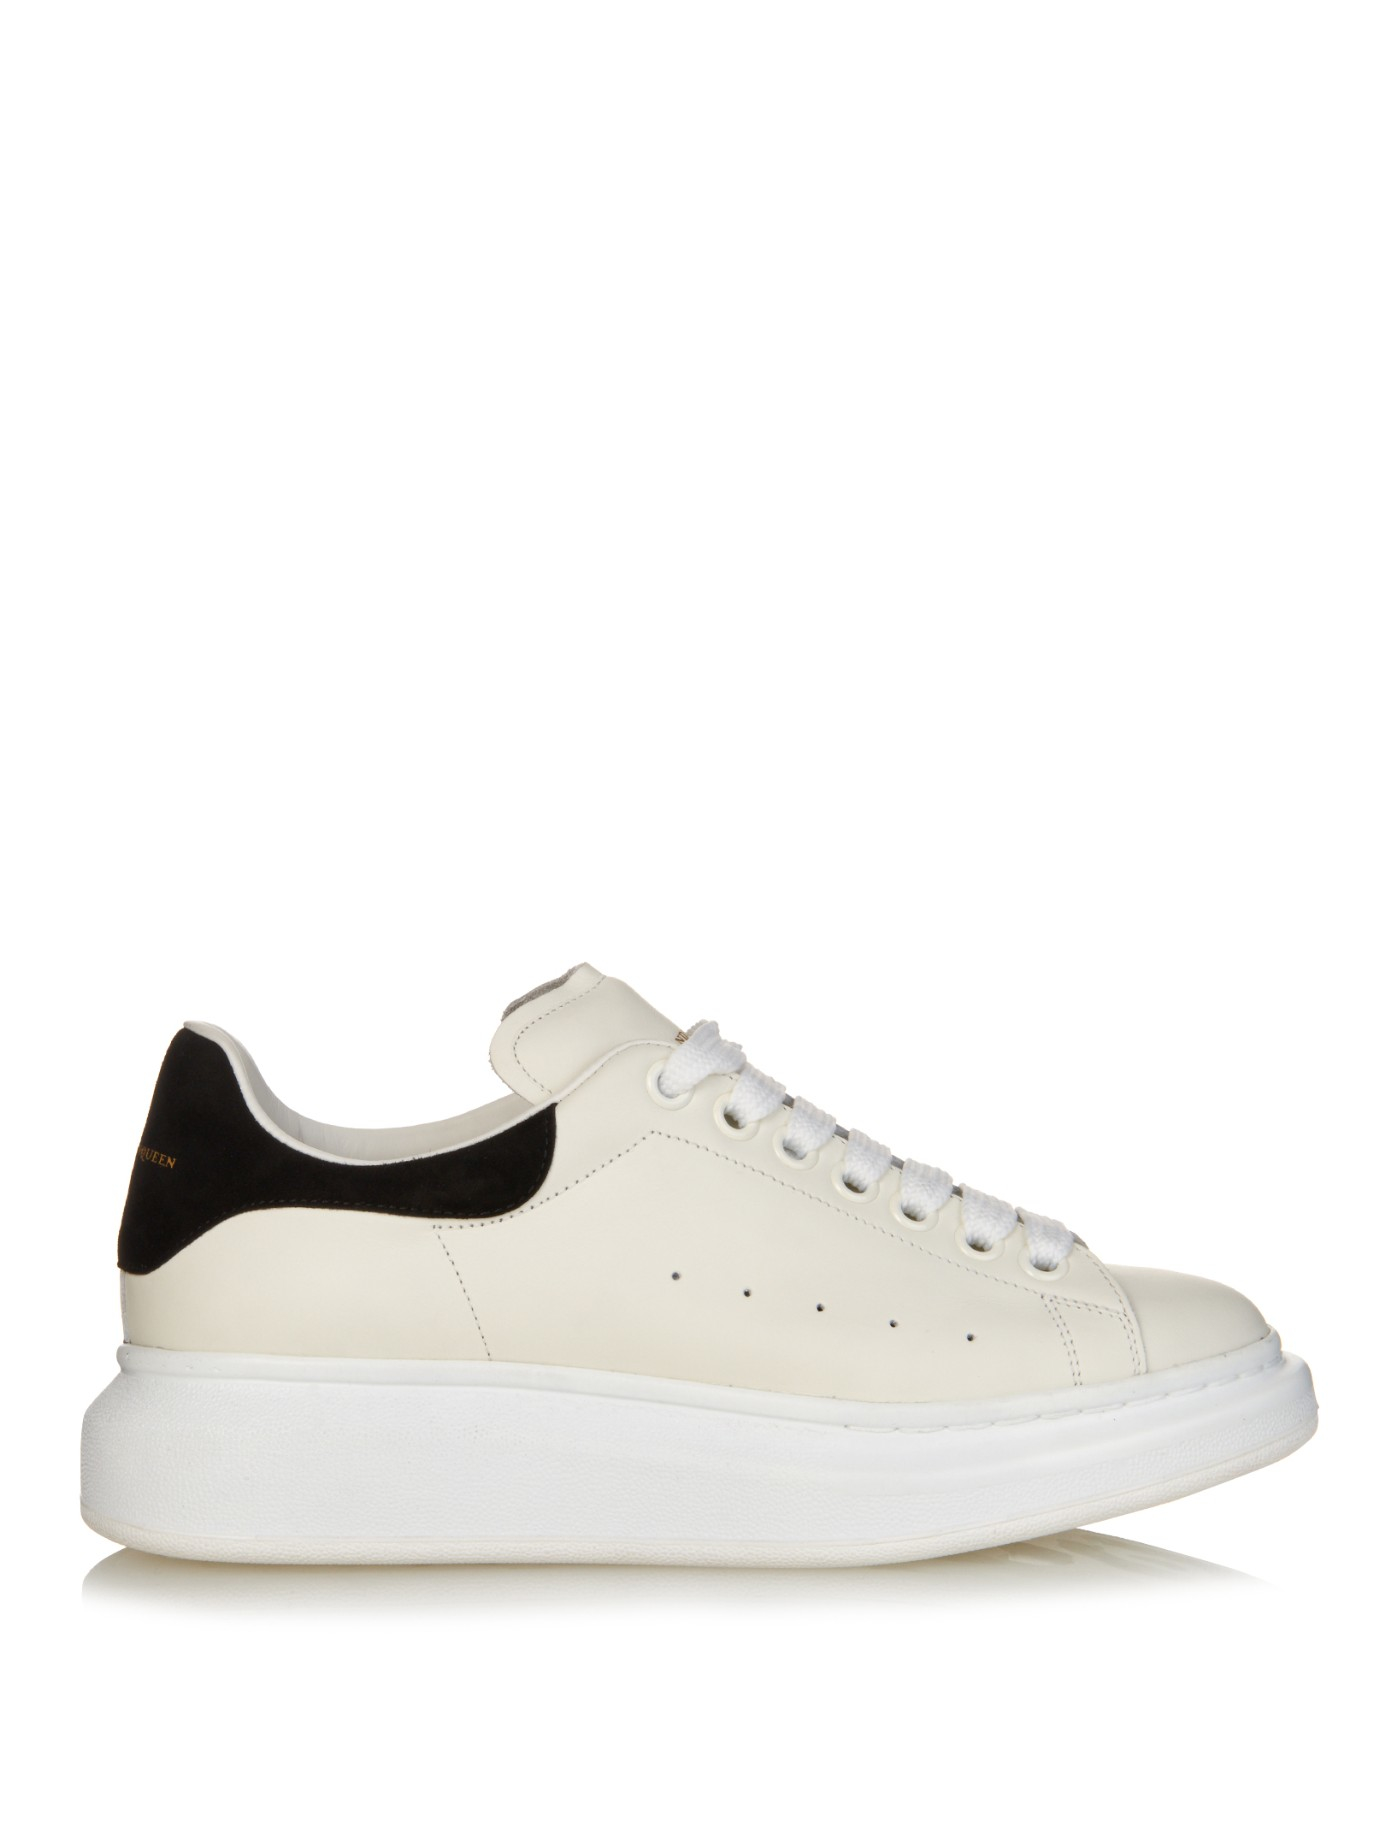 Alexander McQueen Elgar Low-Top Leather Trainers in White - Lyst